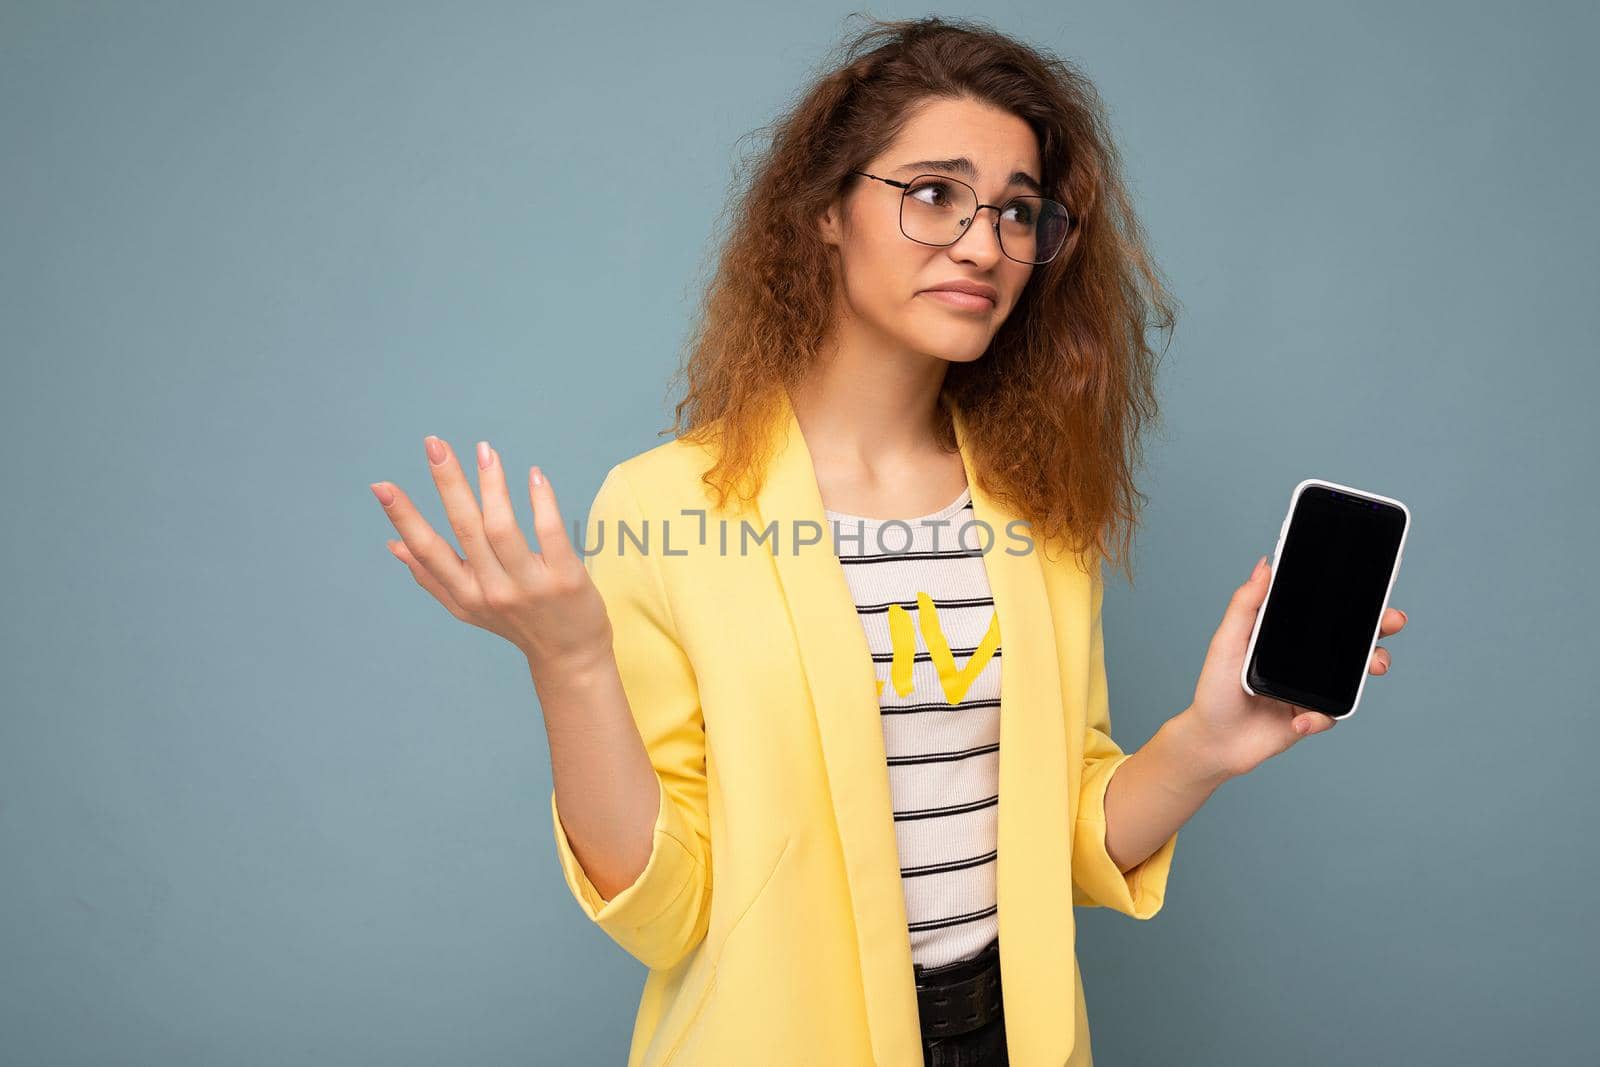 attractive asking young woman with curly dark blond hair wearing yellow jacket and optical glasses isolated on background holding and showing mobile phone with empty space for cutout looking to the side and having doubts.